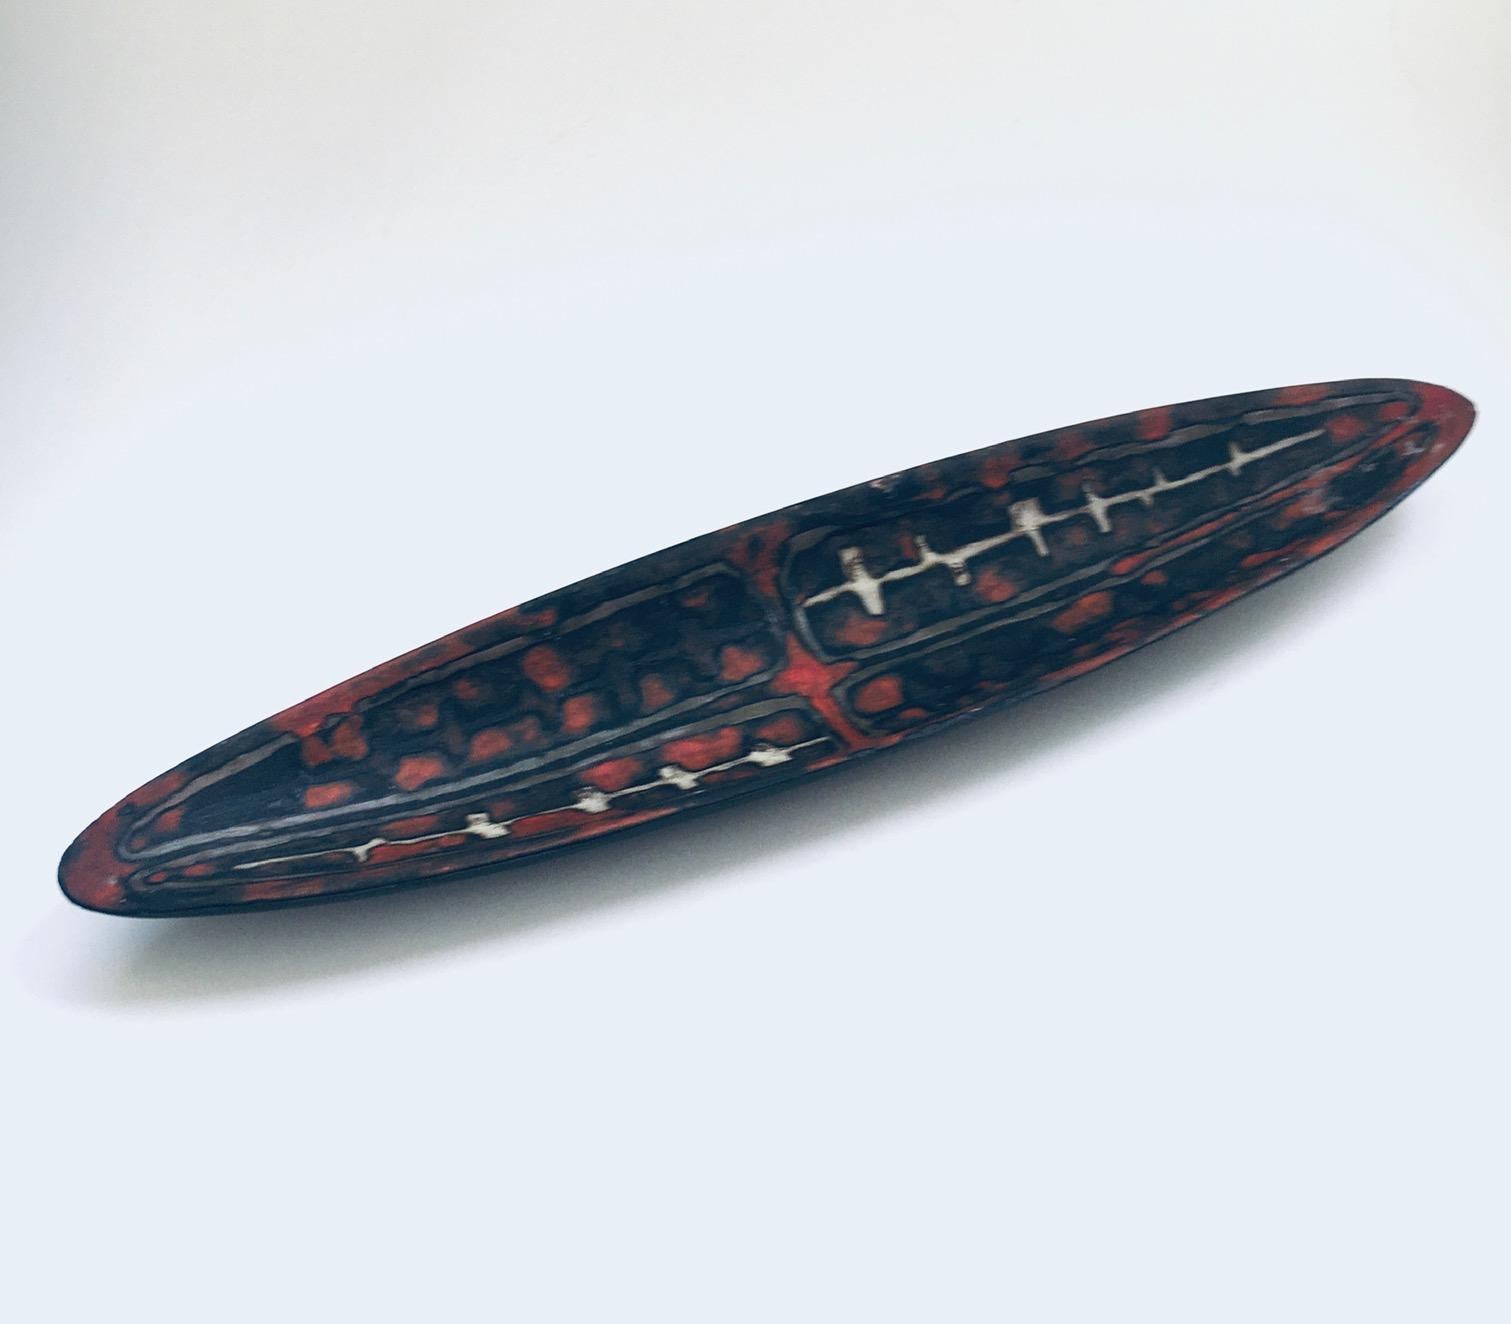 Vintage Midcentury Abstract Art Ceramic Surfboard shape bowl dish from the Perignem Studios. Made in Belgium, 1960's. Rogier Vandeweghe was the most famous of this art pottery studio in Belgium. The studio was also know under the Amphora name. This